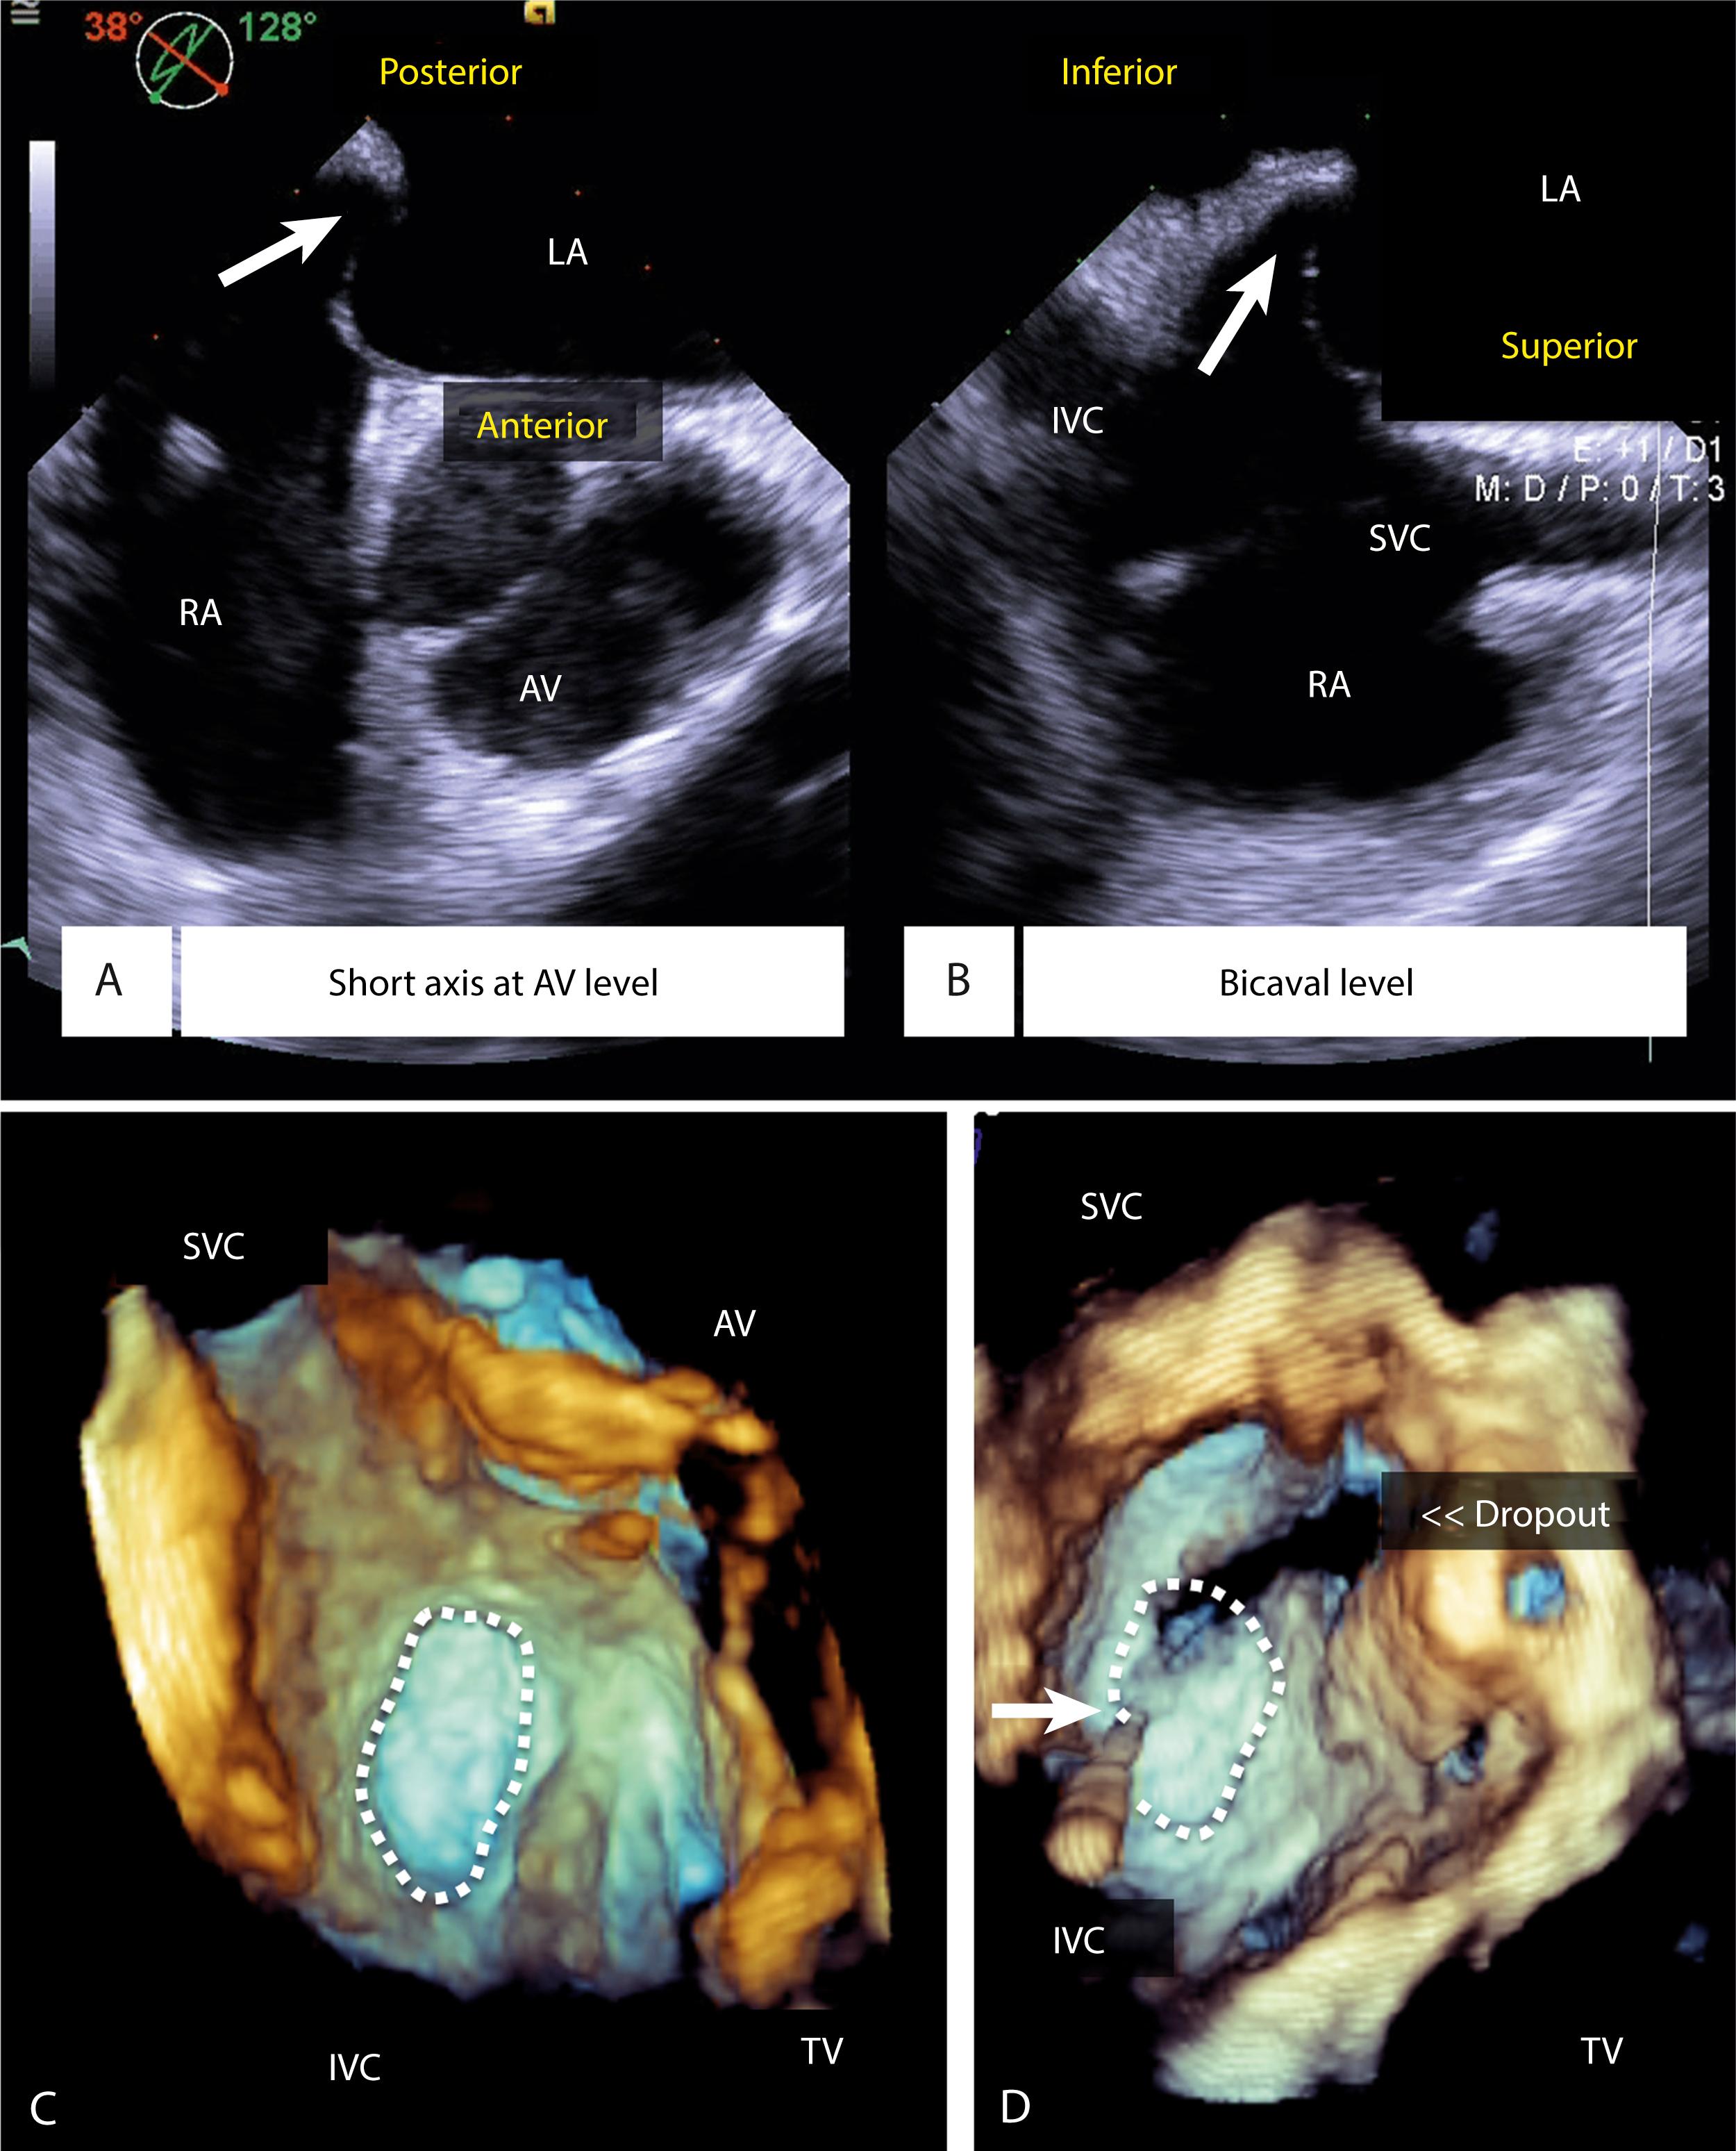 Figure 171.1, Two-dimensional transesophageal echocardiography (TEE) images with biplane imaging demonstrate the interatrial septum in the midesophageal short-axis and bicaval views during the transseptal puncture portion of a left atrial appendage (LAA) occlusion procedure ( A and B ). Note the tenting in the inferior and posterior portion of the fossa ovalis, which is the ideal location for puncture. ( Videos 171.1A and 171.B correspond to A and B .) Three-dimensional TEE of the interatrial septum from the right atrial perspective at baseline before transseptal puncture ( C ) and after transseptal puncture ( D ). This view demonstrates the anatomic location of the fossa ovalis (white dotted circles) at baseline ( C ) and catheter-related dropout ( D ). AV, Aortic valve; LA, left atrium; IVC, inferior vena cava; PA, pulmonary artery; RA, right atrium; SVC, superior vena cava; TV, tricuspid valve.